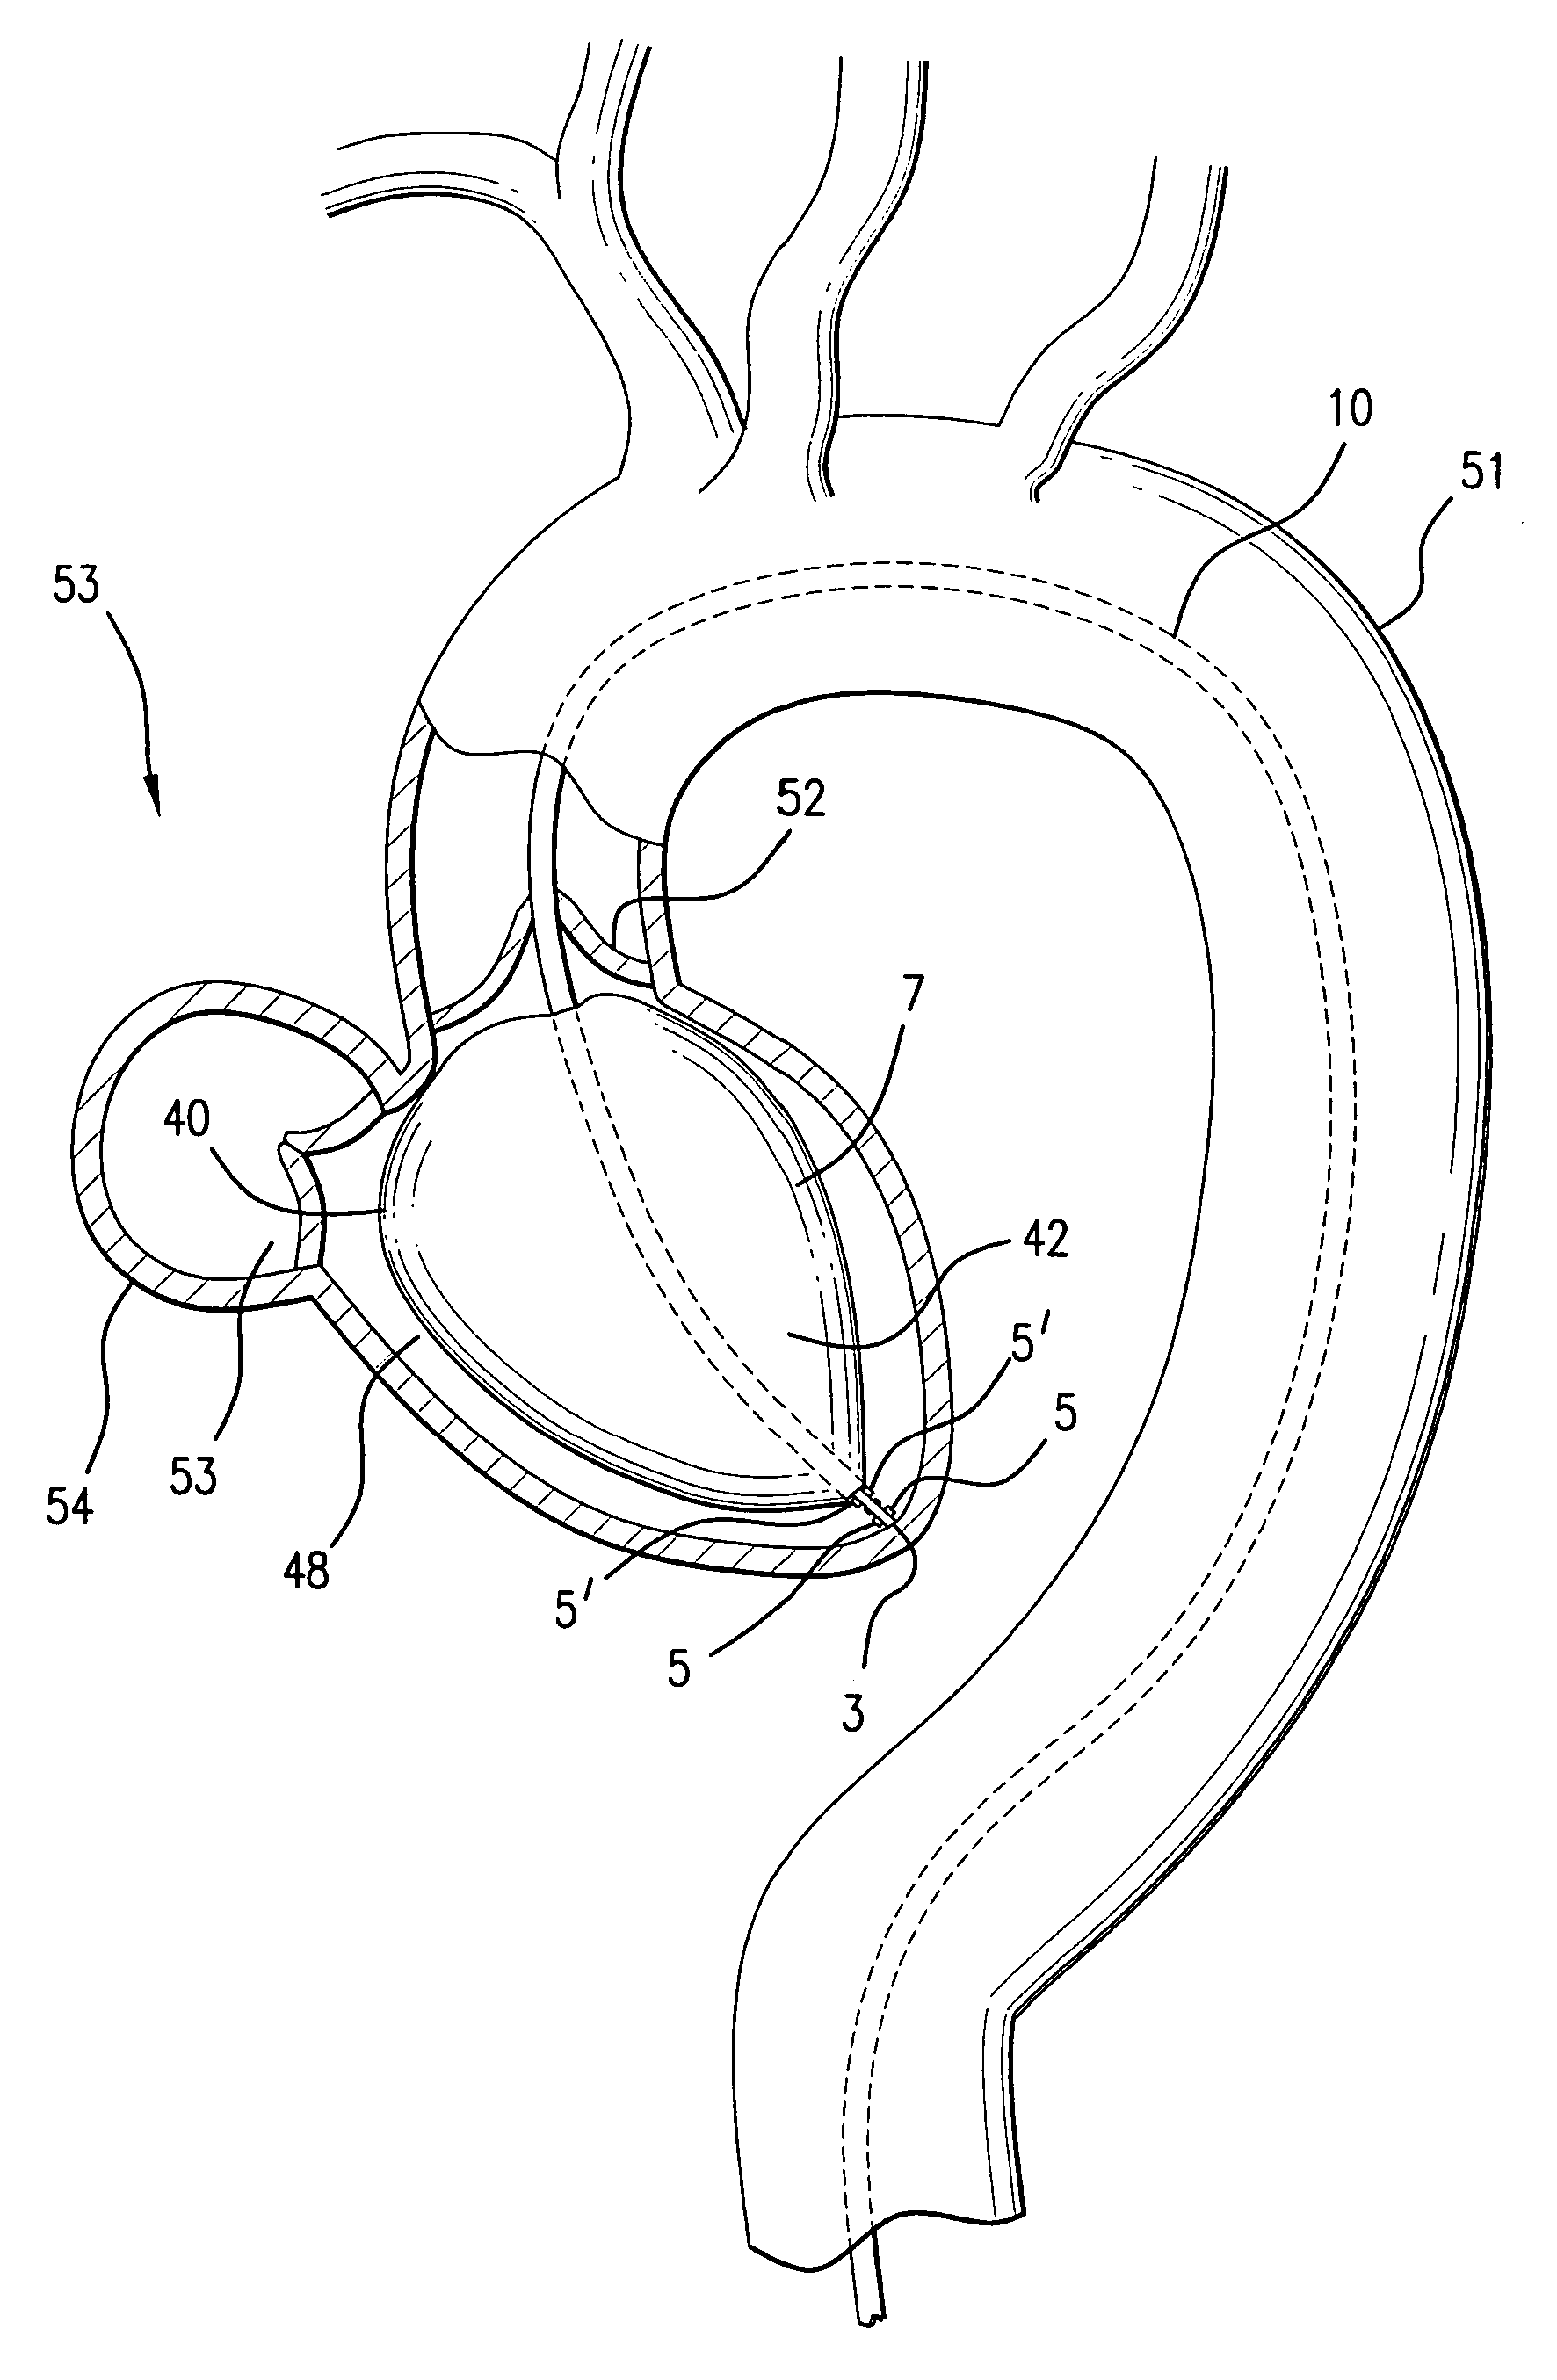 Intra-ventricular cardiac assist device and related method of use